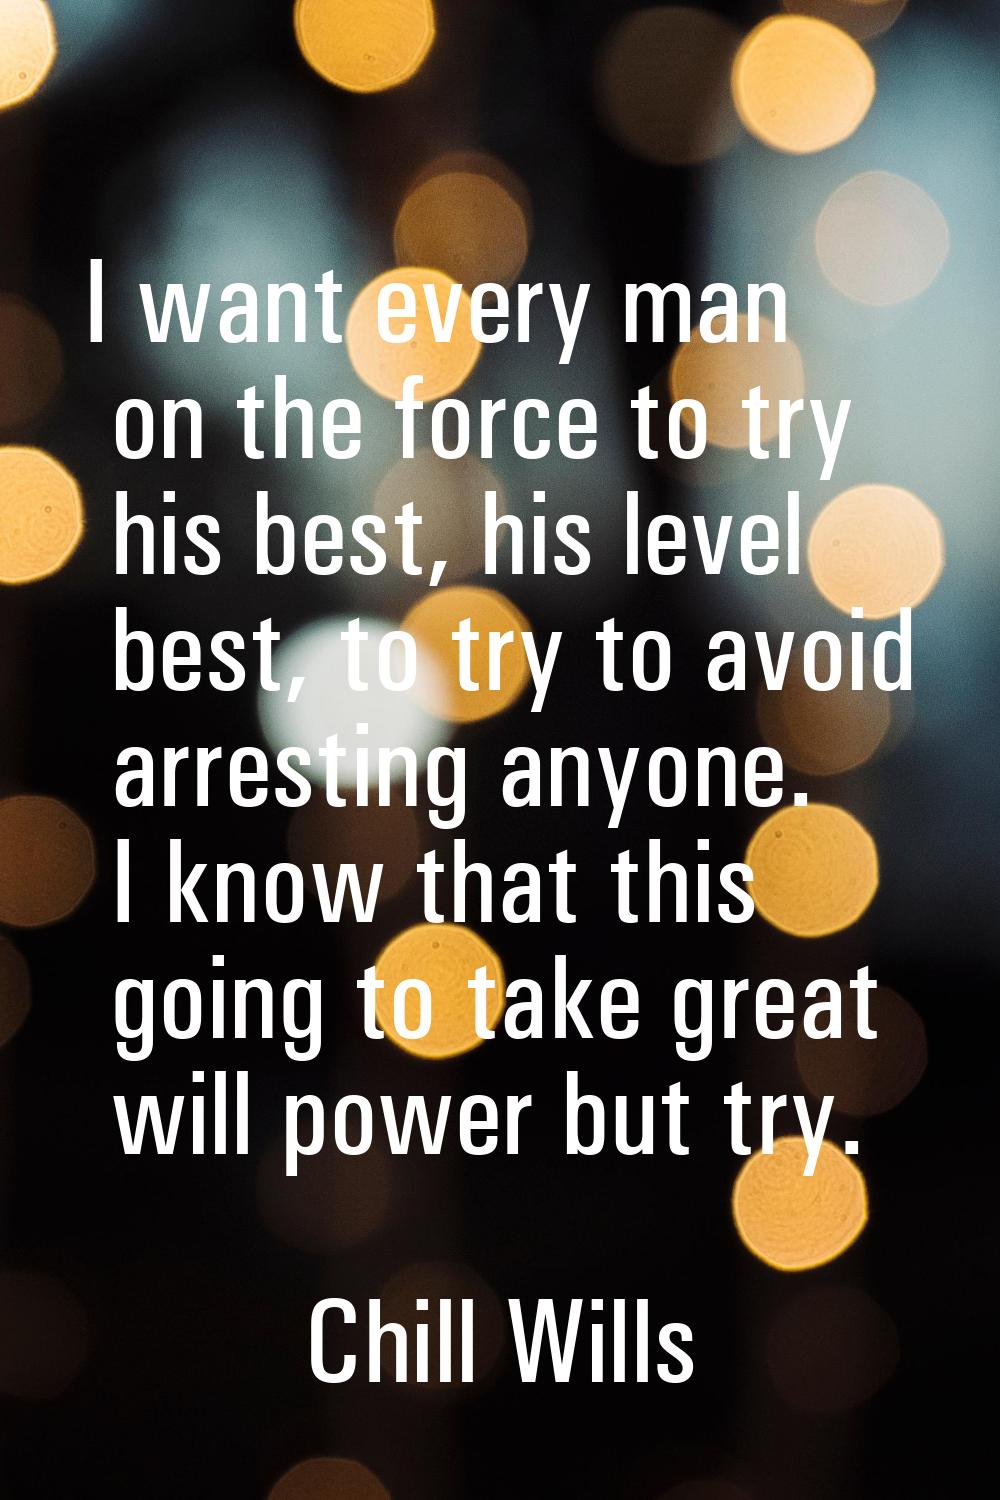 I want every man on the force to try his best, his level best, to try to avoid arresting anyone. I 